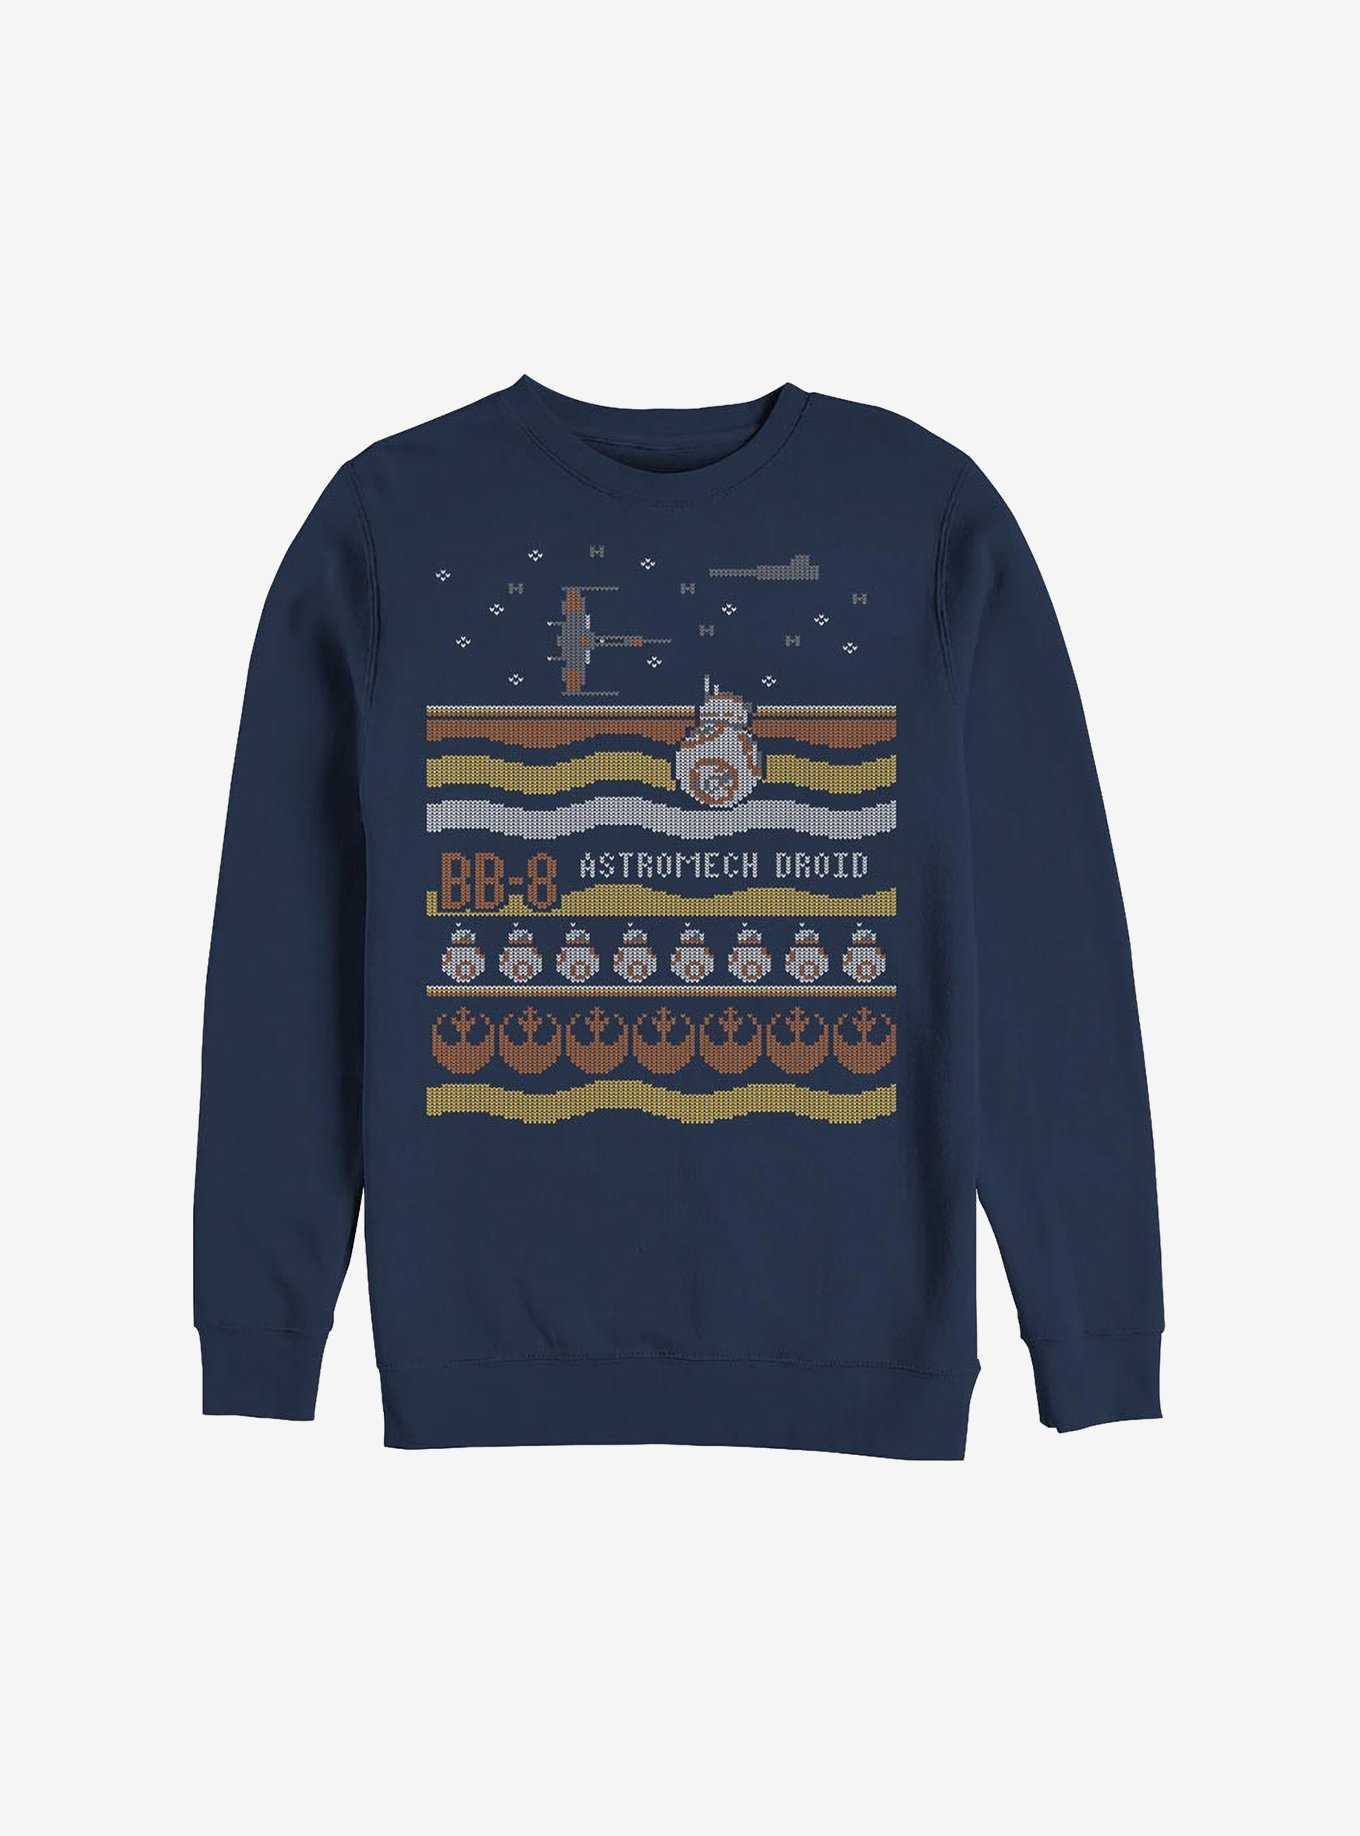 Star Wars Episode VII The Force Awakens Astromech Droid Ugly Christmas Sweater Sweatshirt, , hi-res